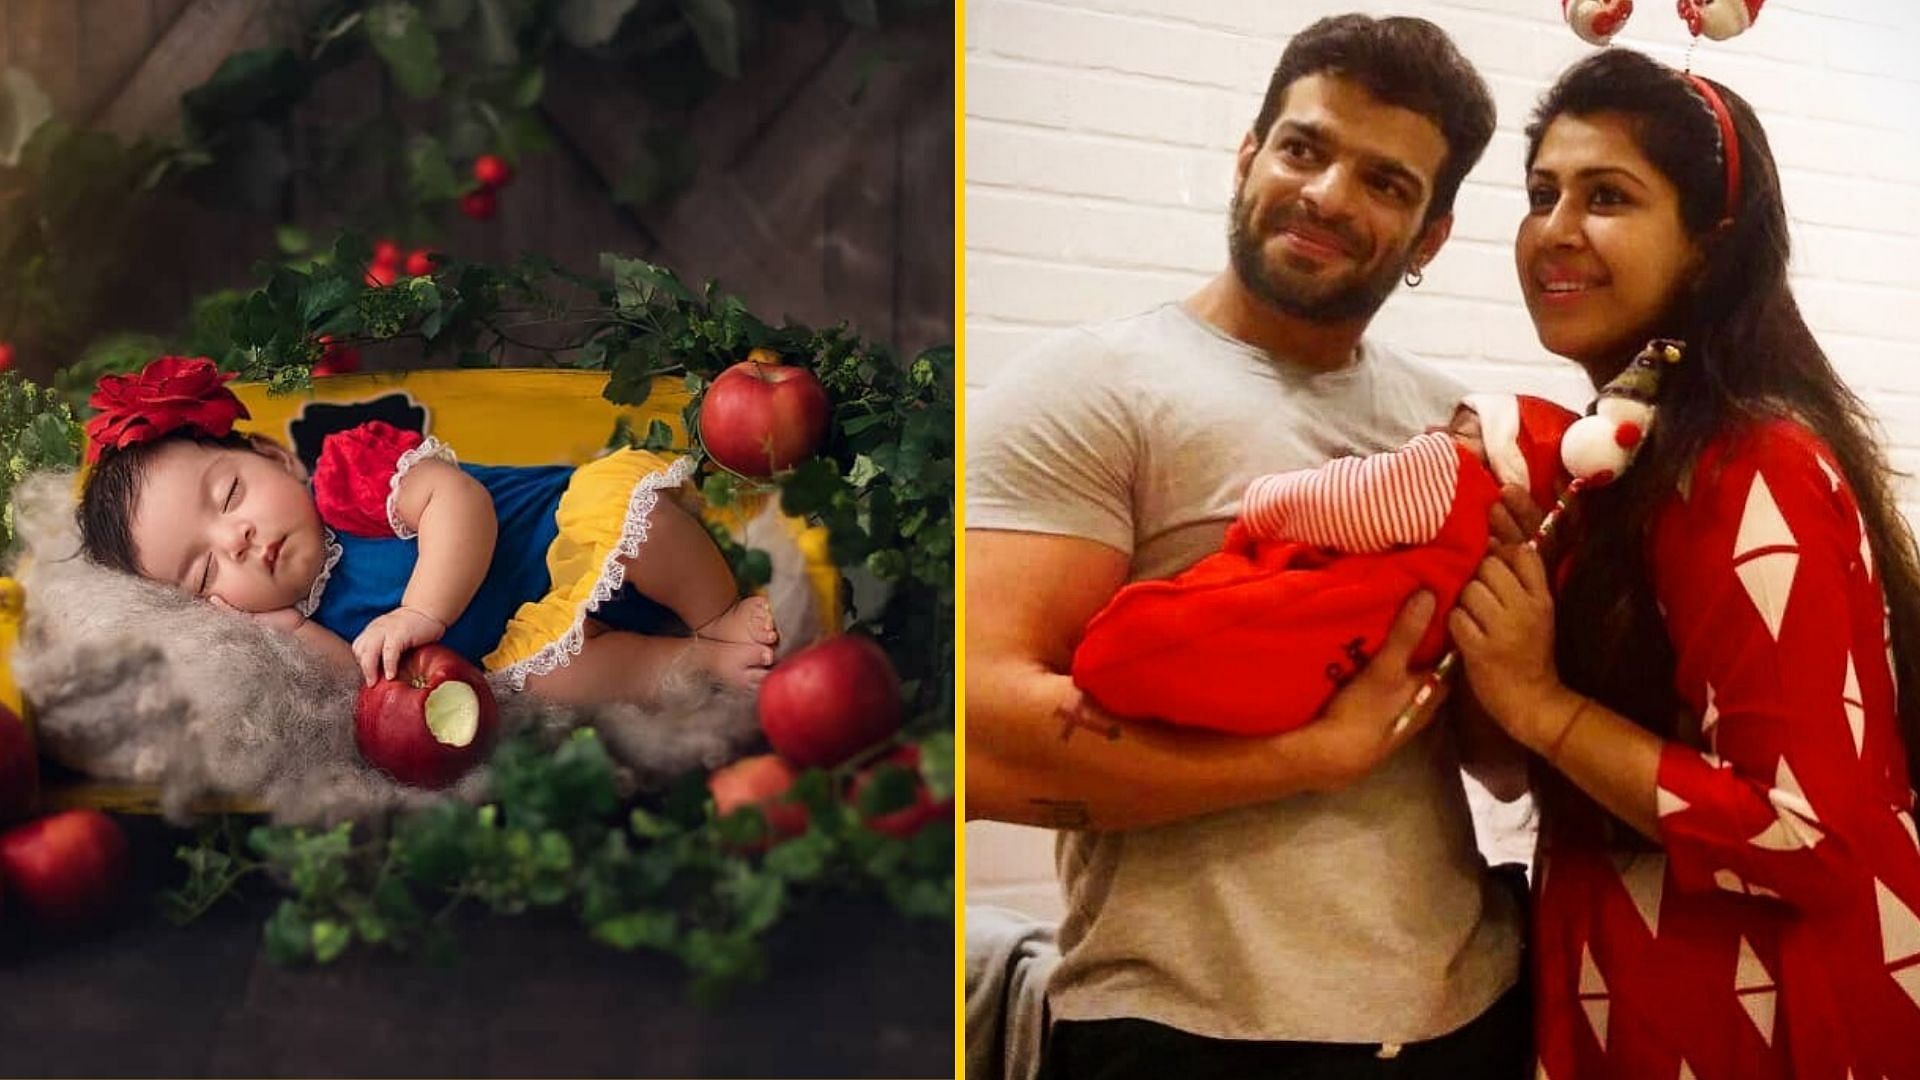 Jay Bhanushali and Karan Patel both shared first photos of their daughters on Christmas.